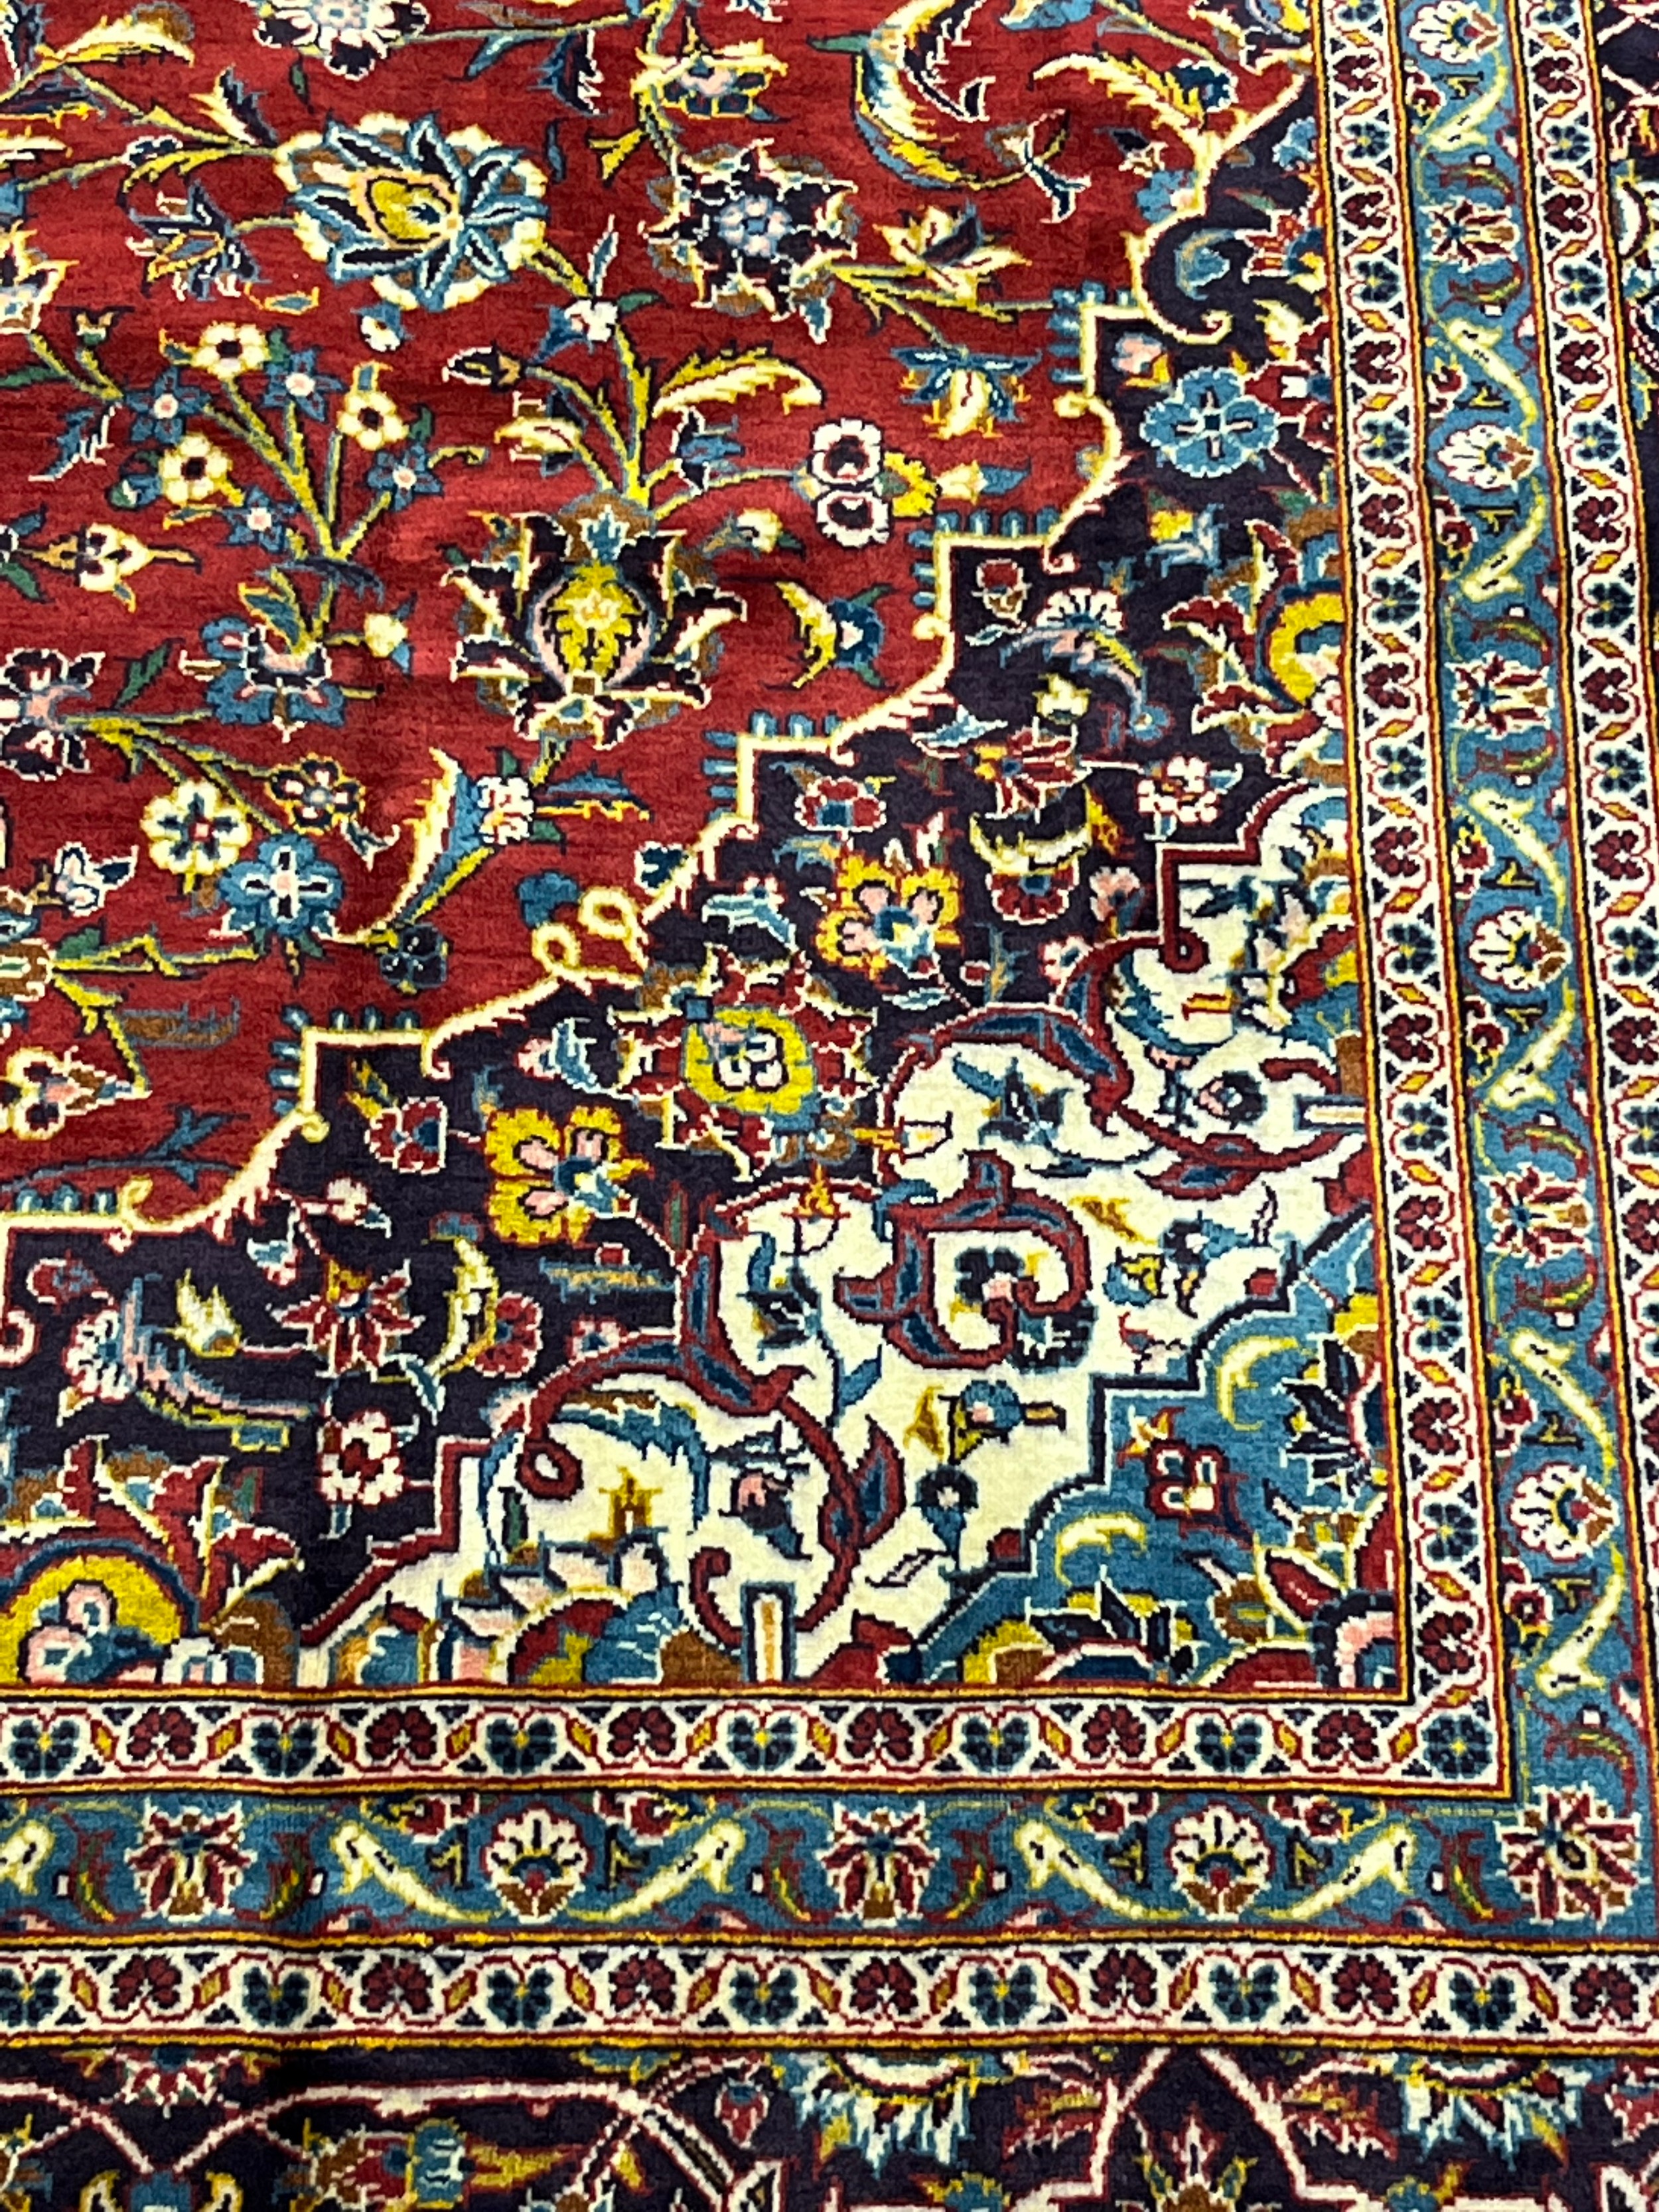 Large Persian carpet/rug, highly decorative with red ground. [535x296cm] - Image 6 of 7